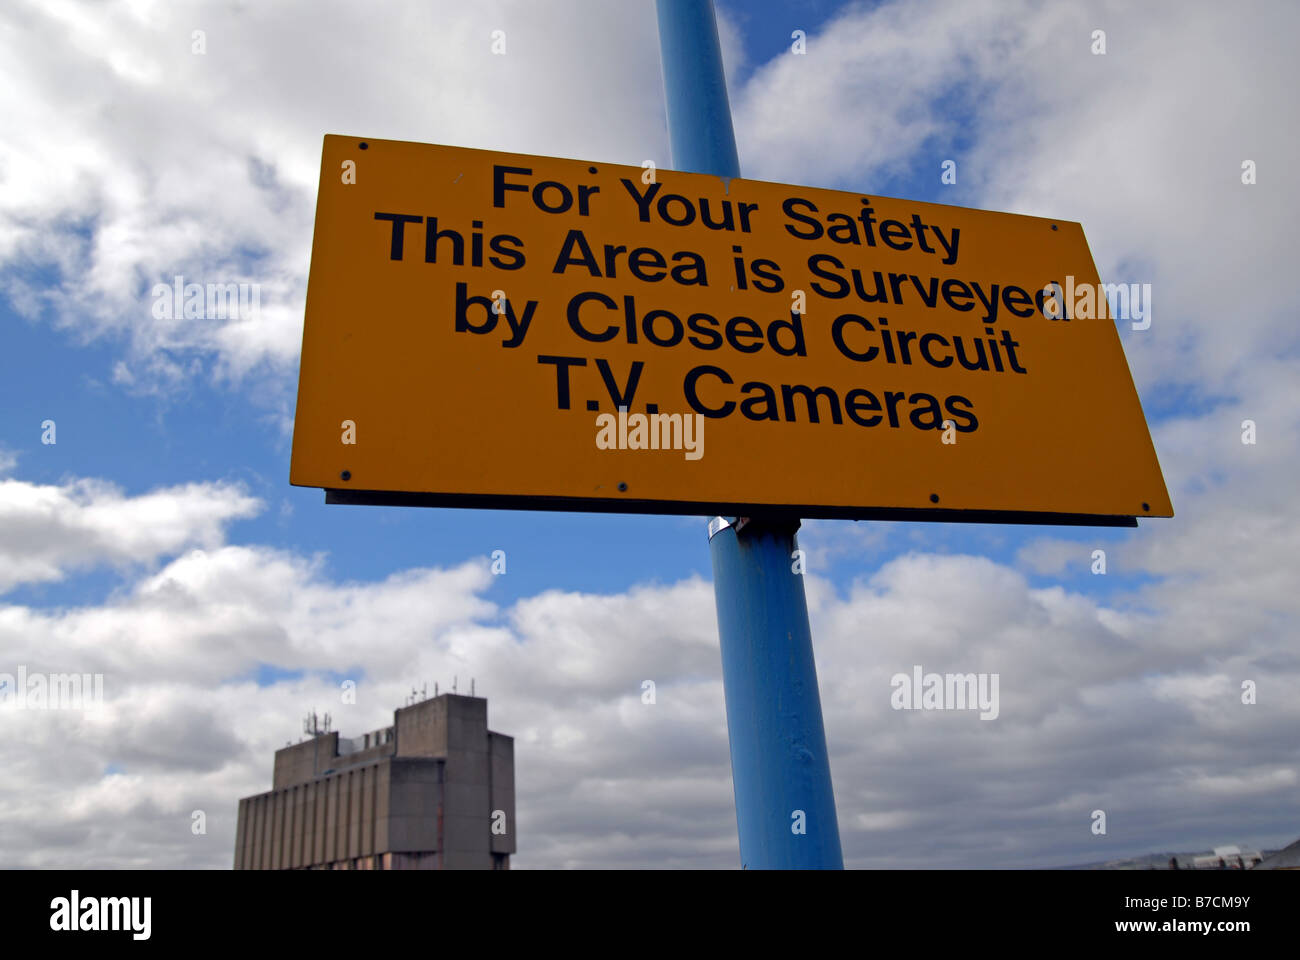 Security warning / CCTV sign in an inner city area Stock Photo